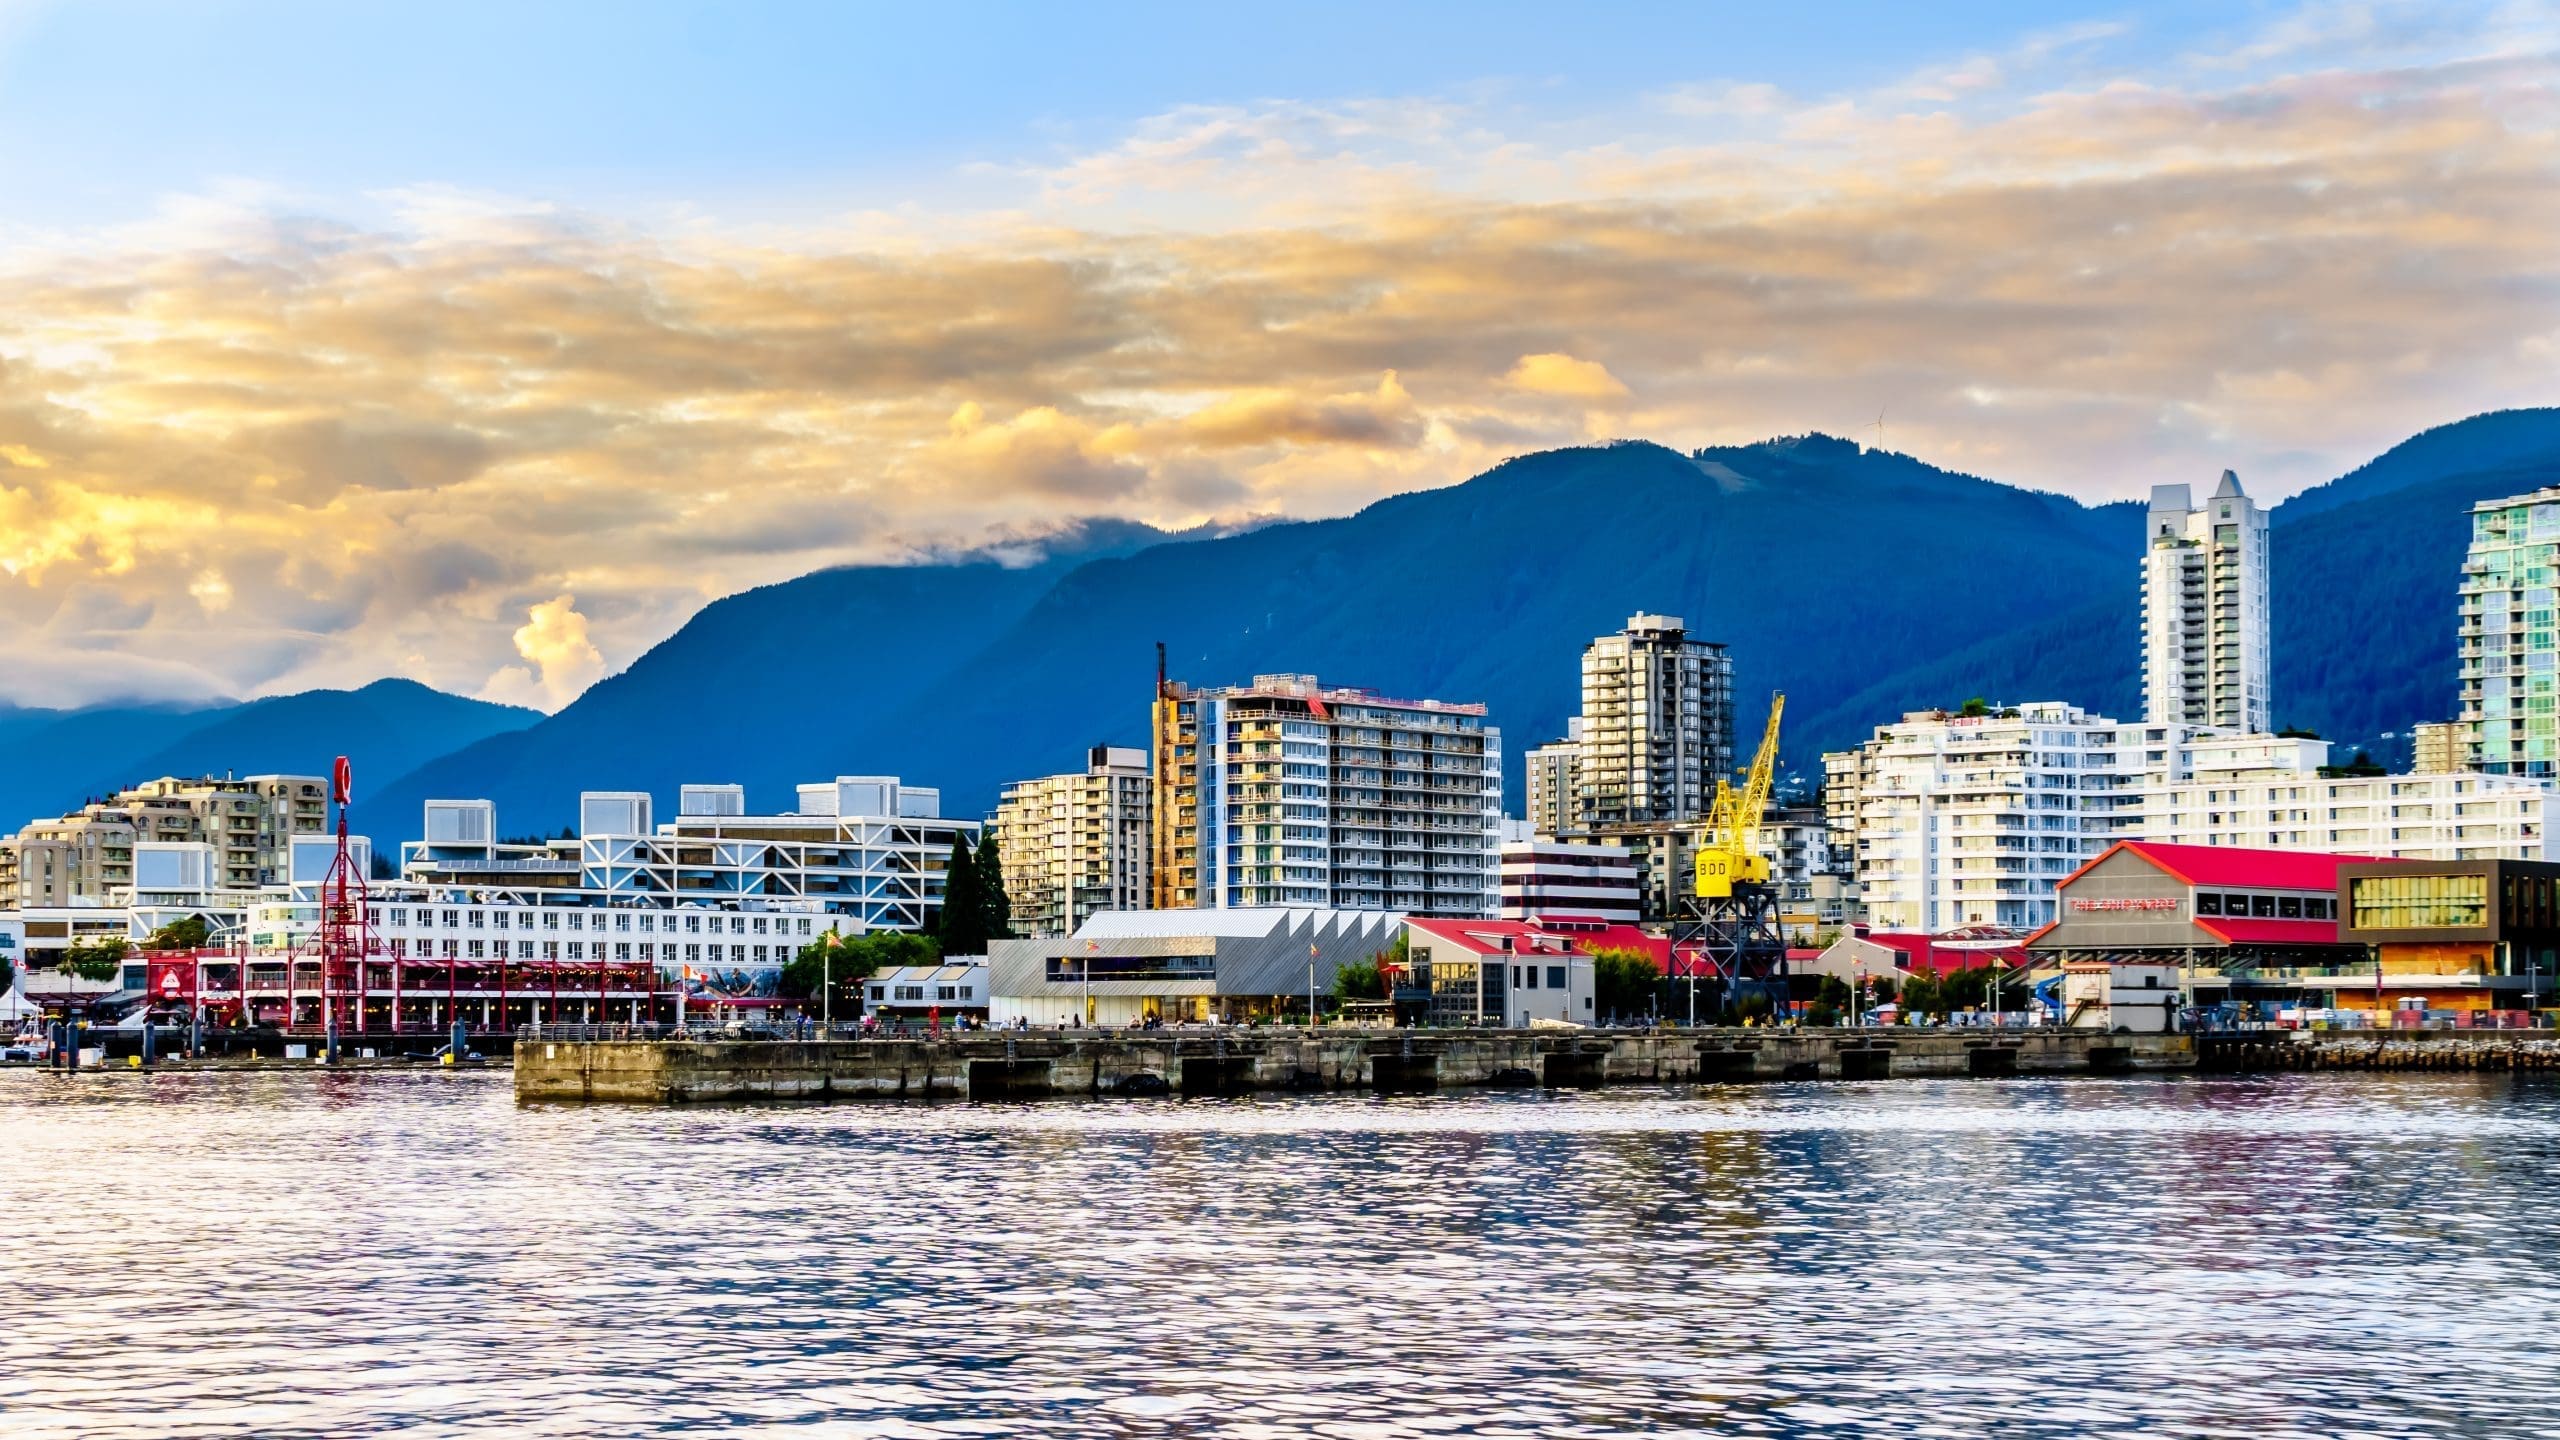 Scenic view of Lonsdale Quay, shipyard, ocean, and high-rises in North Vancouver, highlighting the diverse real estate managed by Vancouver Property Management VPM Group RE/MAX, North Vancouver Property Management